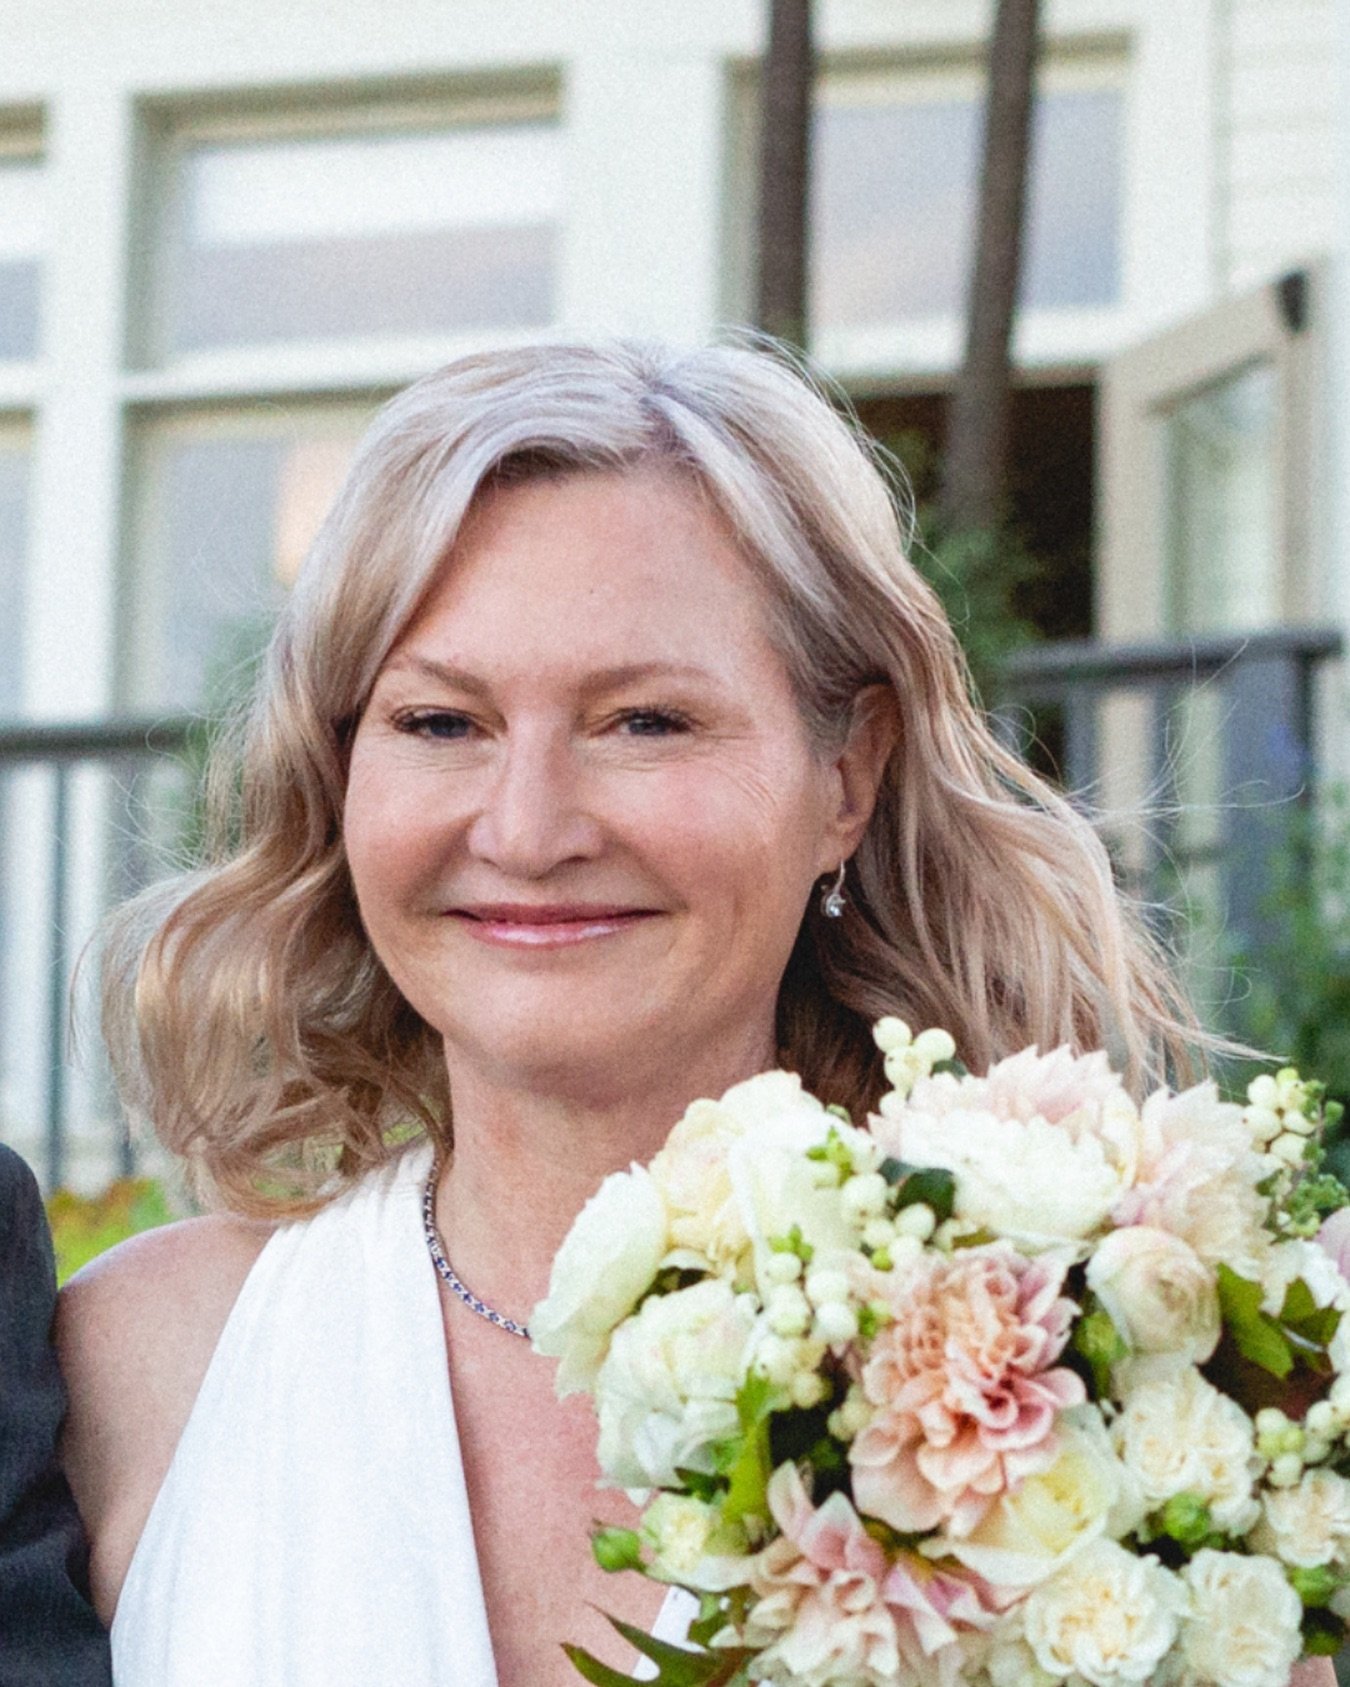 ✨I love Lisa&rsquo;s bridal look! Radiant and natural makeup, and soft, romantic hair.

My extensive background in hairstyling, and pursuing education continually through my 35 years has brought me to a place of recognizing that the art of simplicity